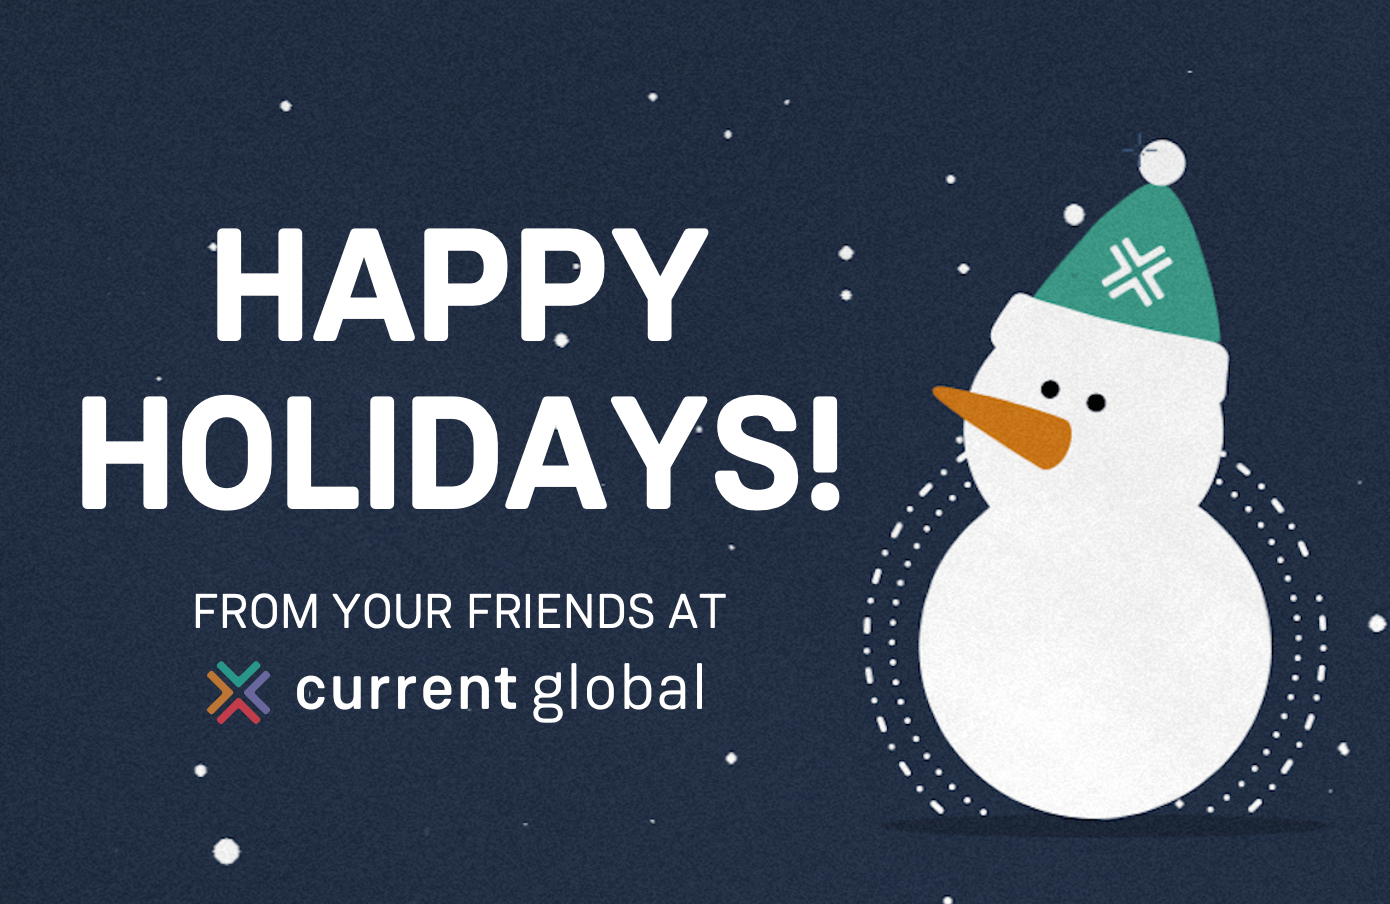 Cartoon-style snowman against a dark background with snow flakes, with greeting that says Happy Holiday from your friends at Current Global.